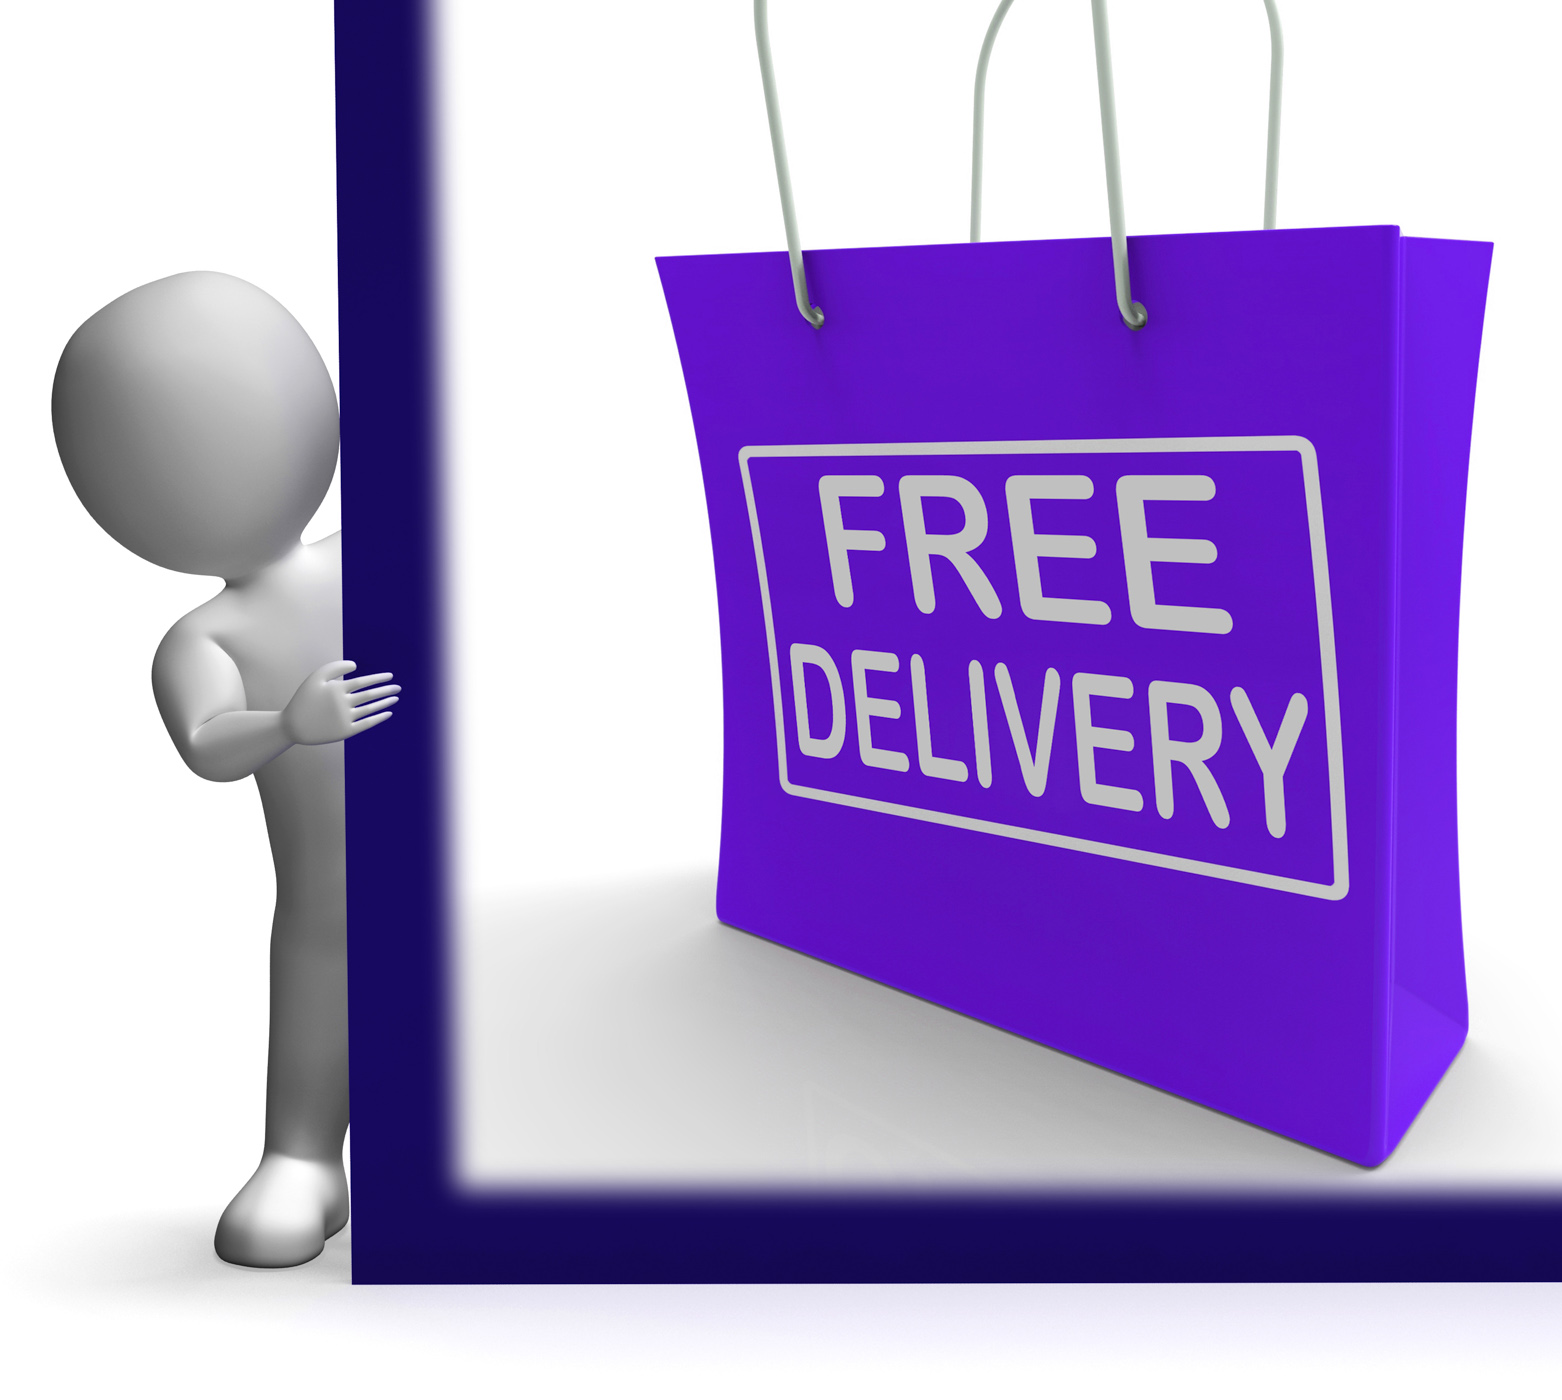 Free delivery shopping sign showing no charge or gratis to deliver photo